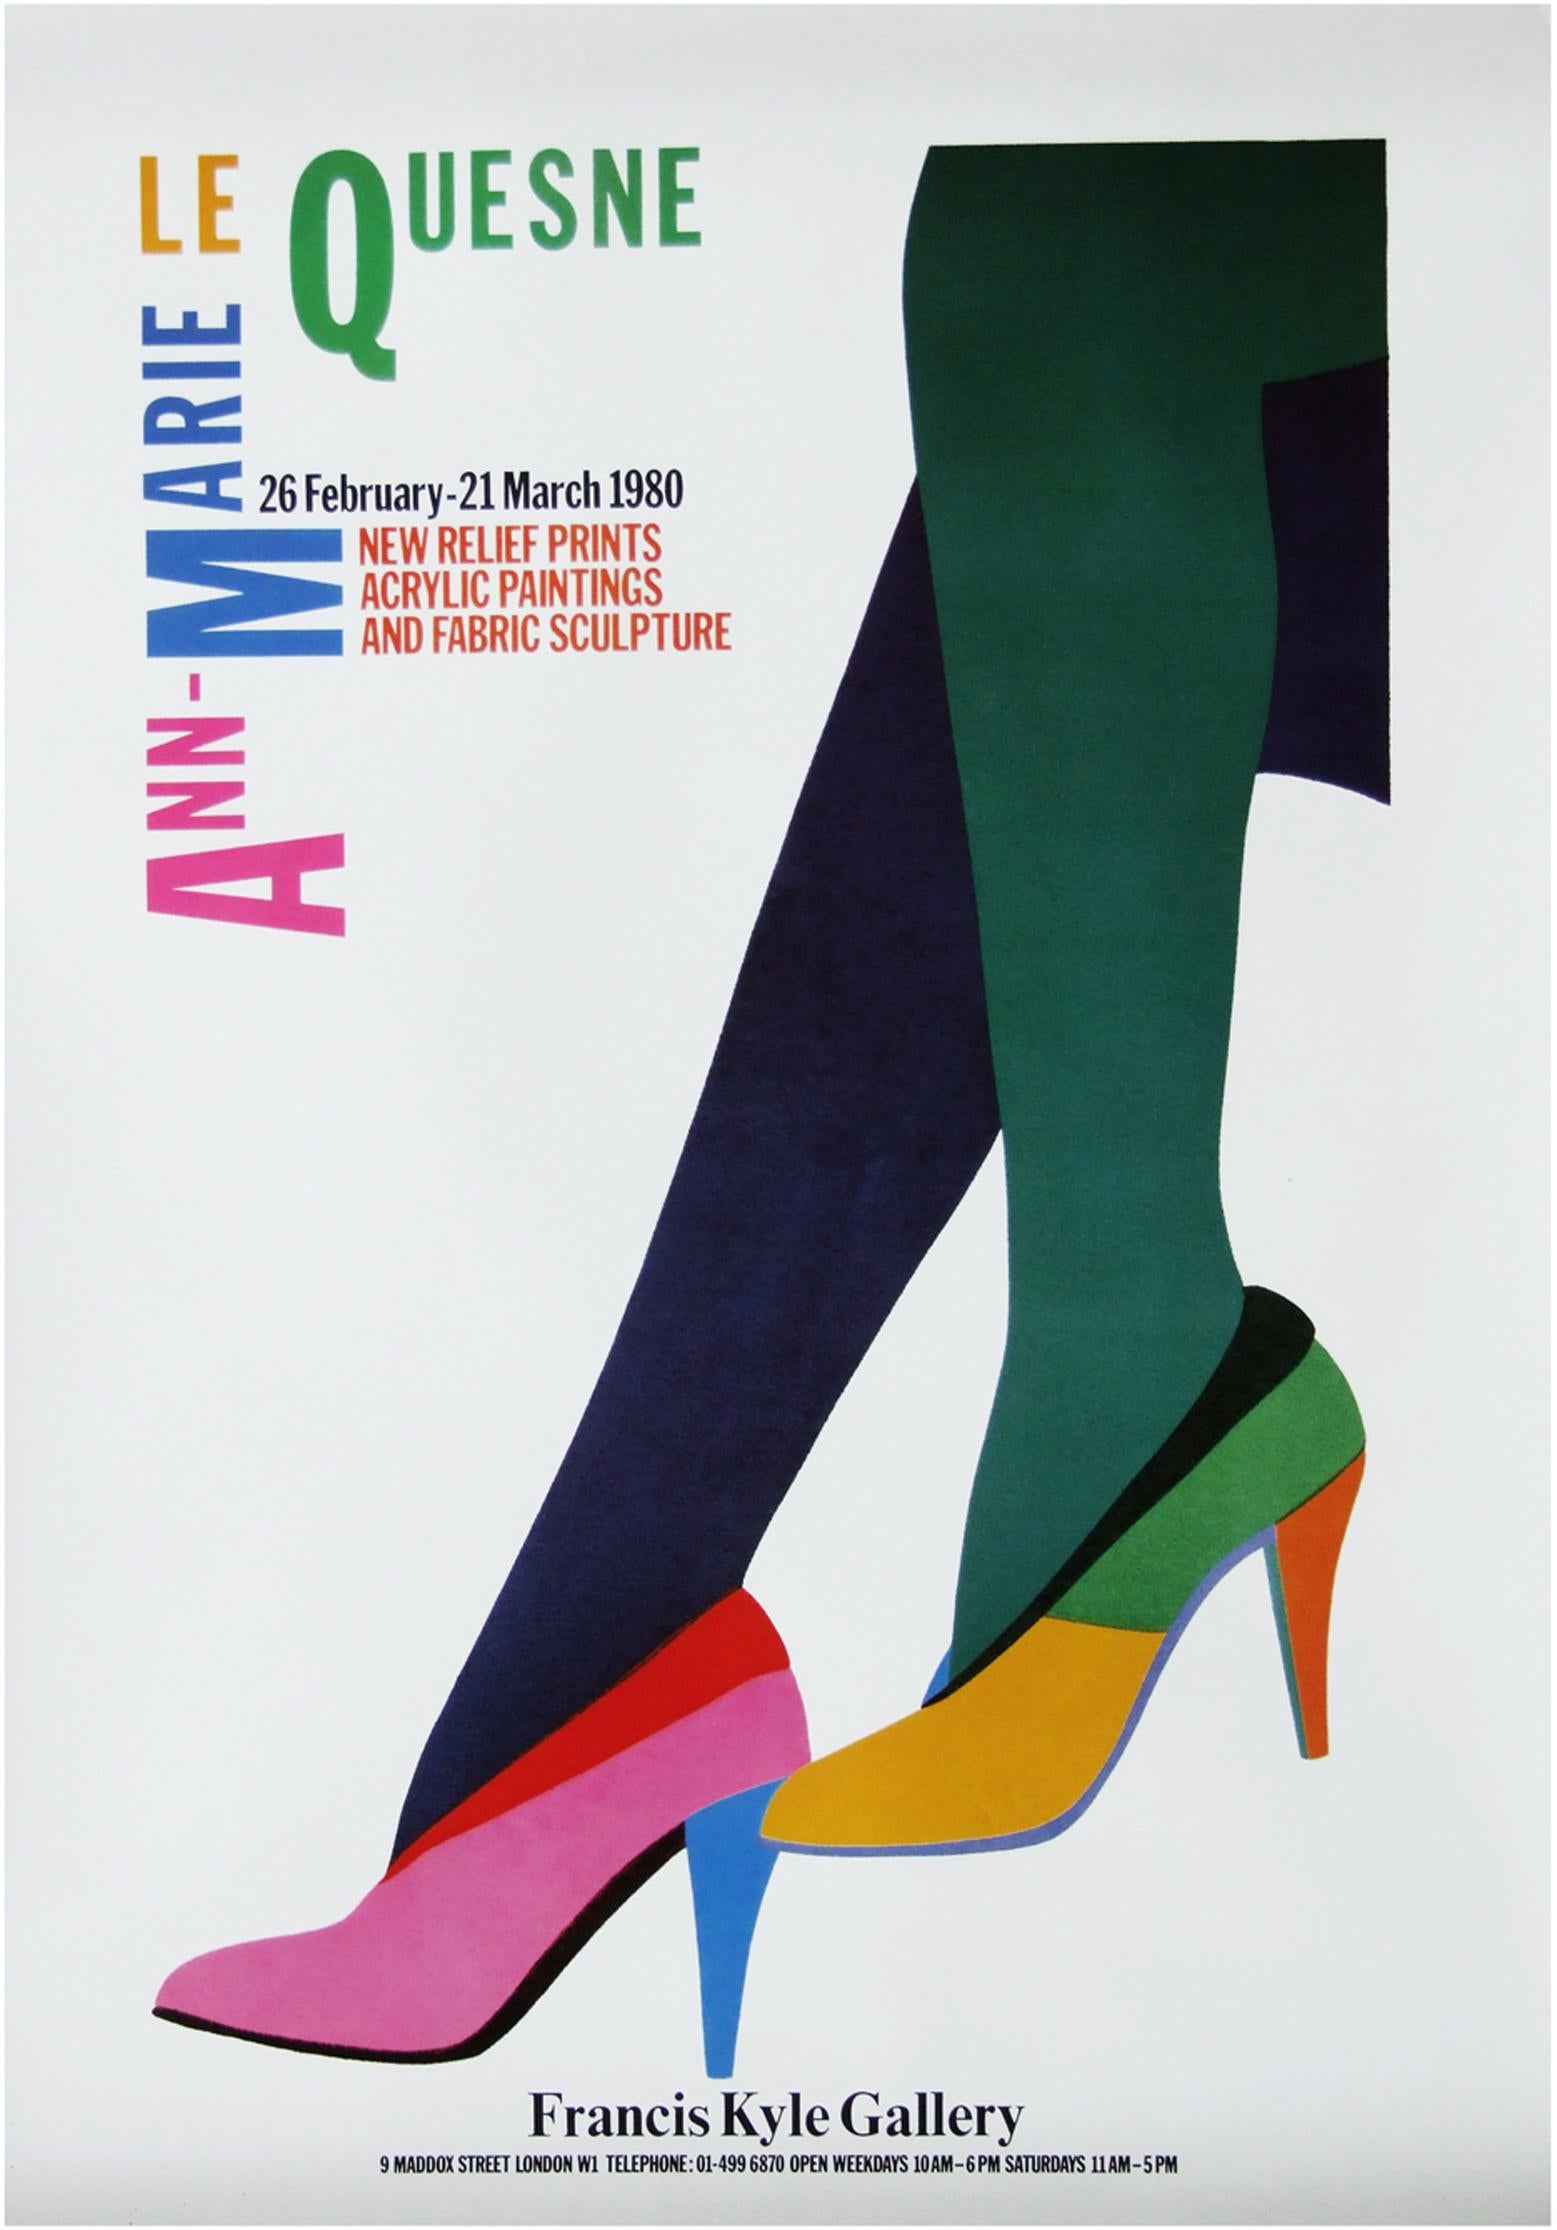 Original 1980 promotional poster for the Ann-Marie Le Quesne exhibition at the Francis Kyle Gallery, London.

First edition color offset lithograph.

Rolled.

Measures: L 59 cm x W 42 cm.